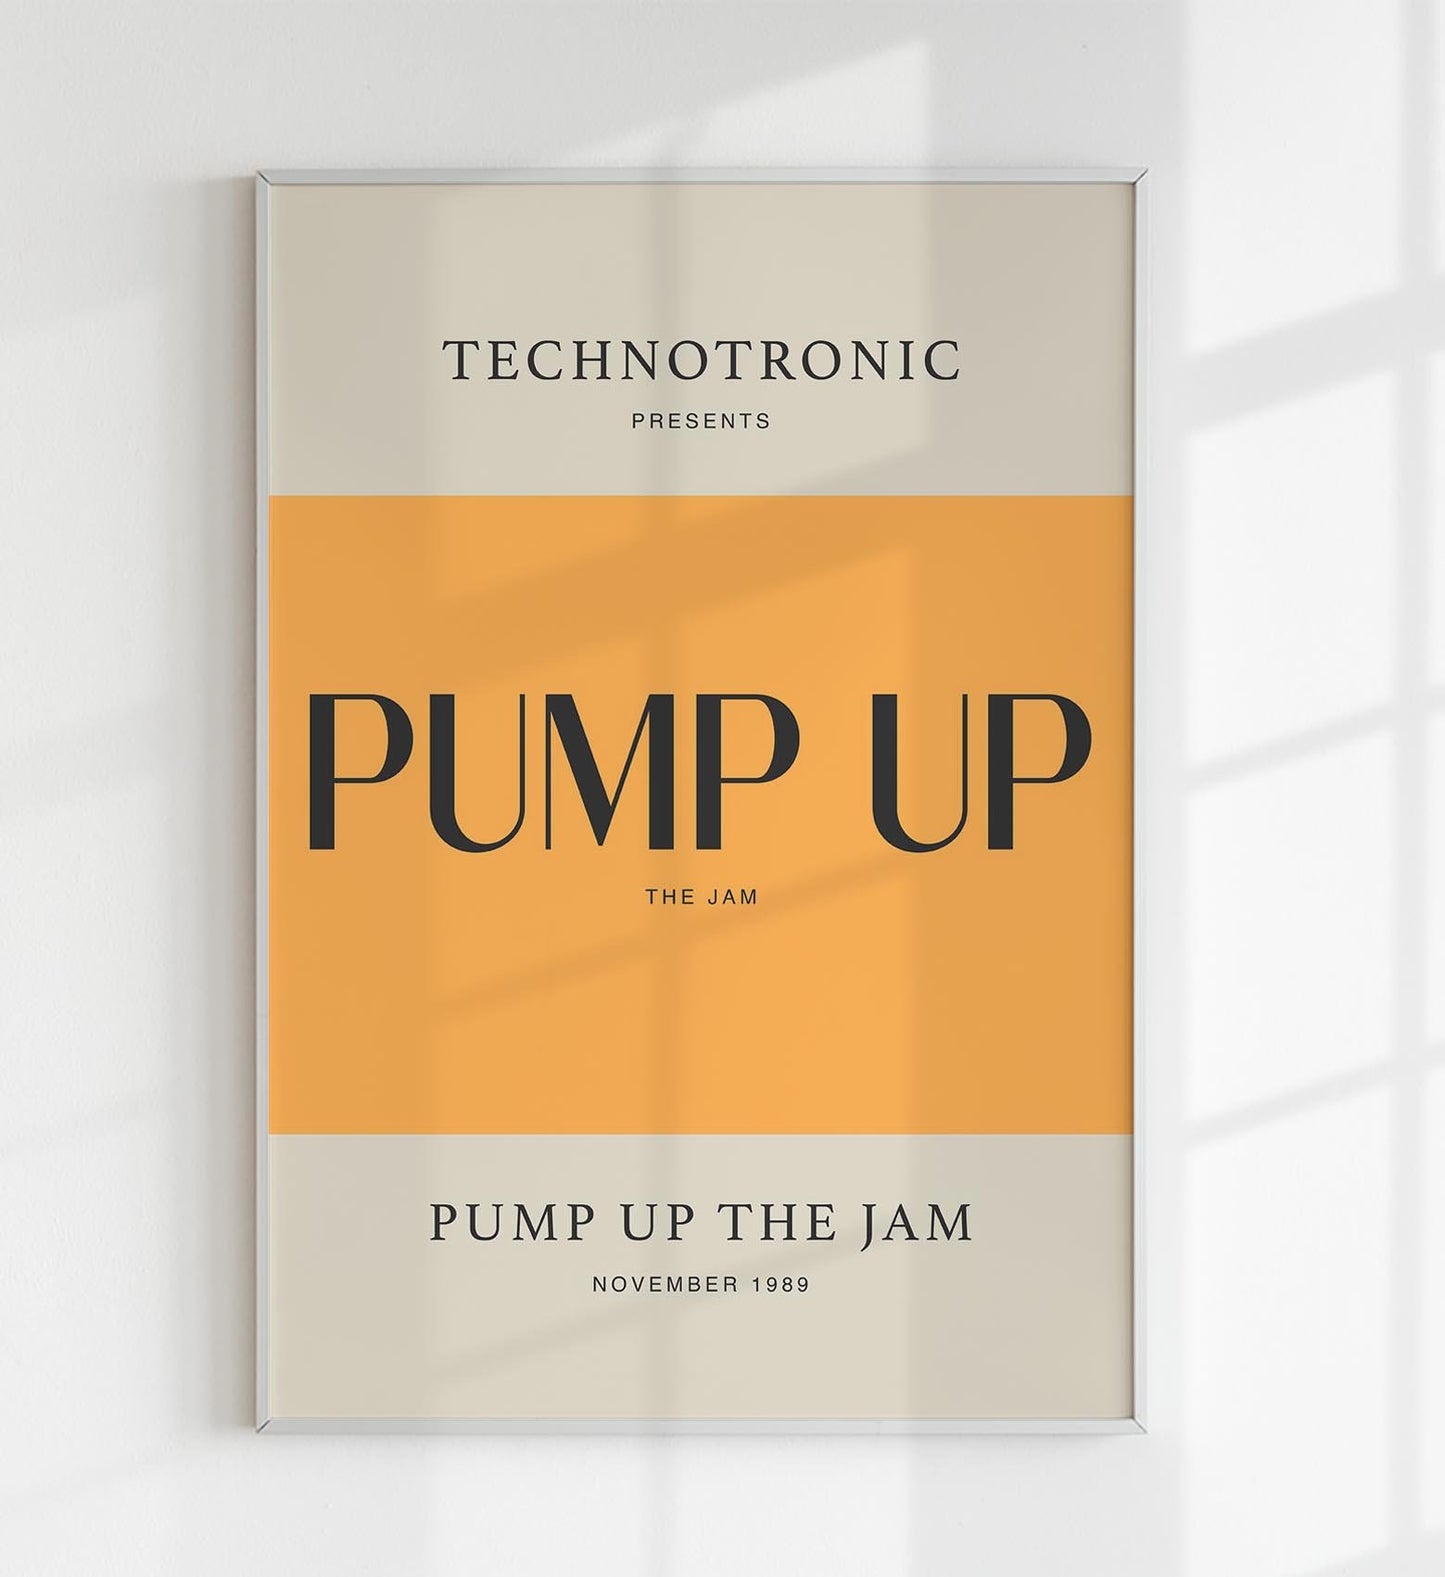 Pump Up the Jam by Technotronic